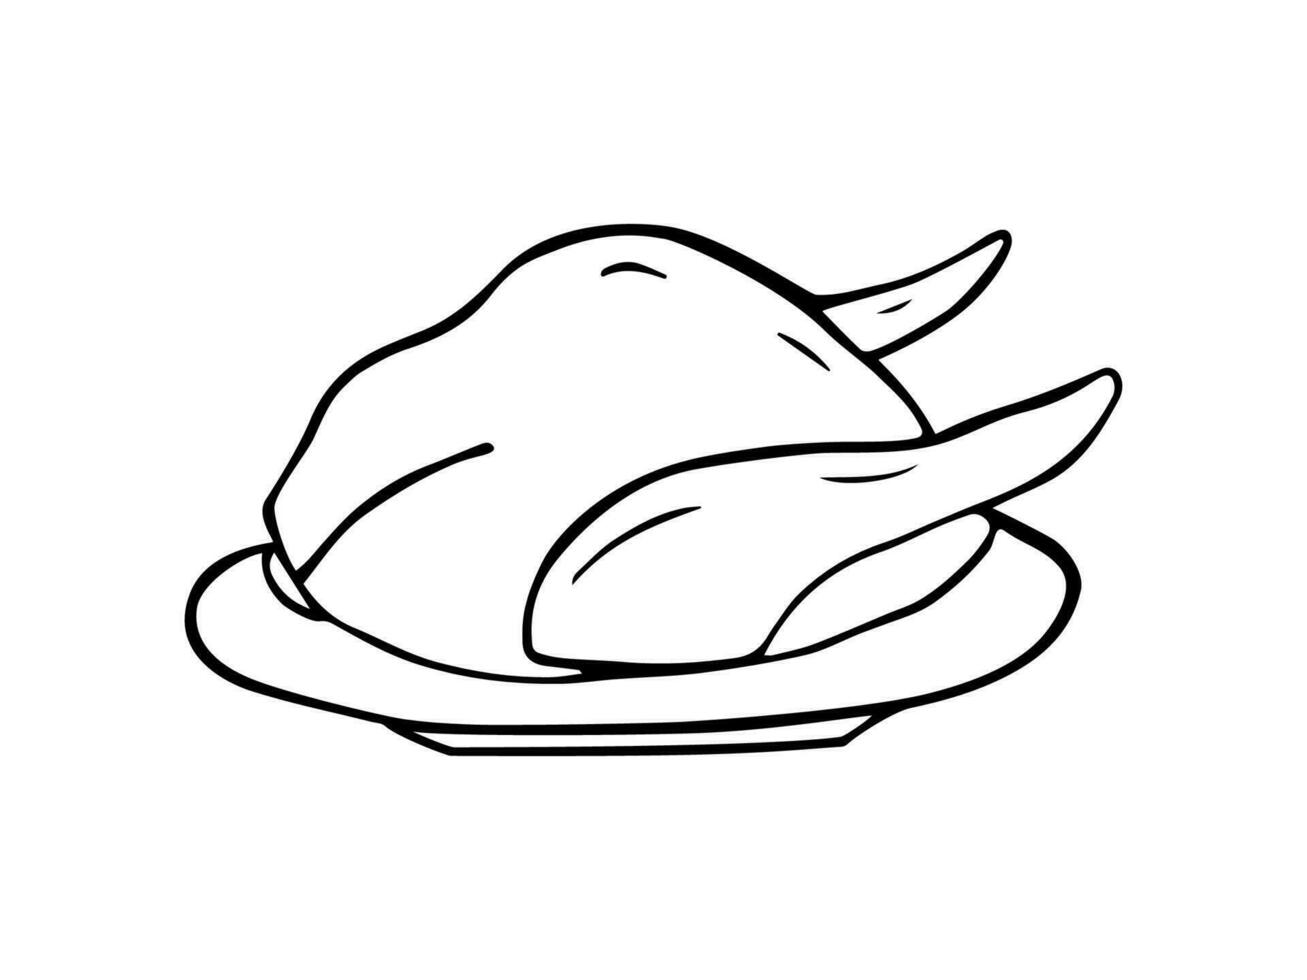 Grilled chicken on a plate icon doodle style. Christmas or New Year's dish baked turkey or chicken. Vector illustration sketch on a white background.